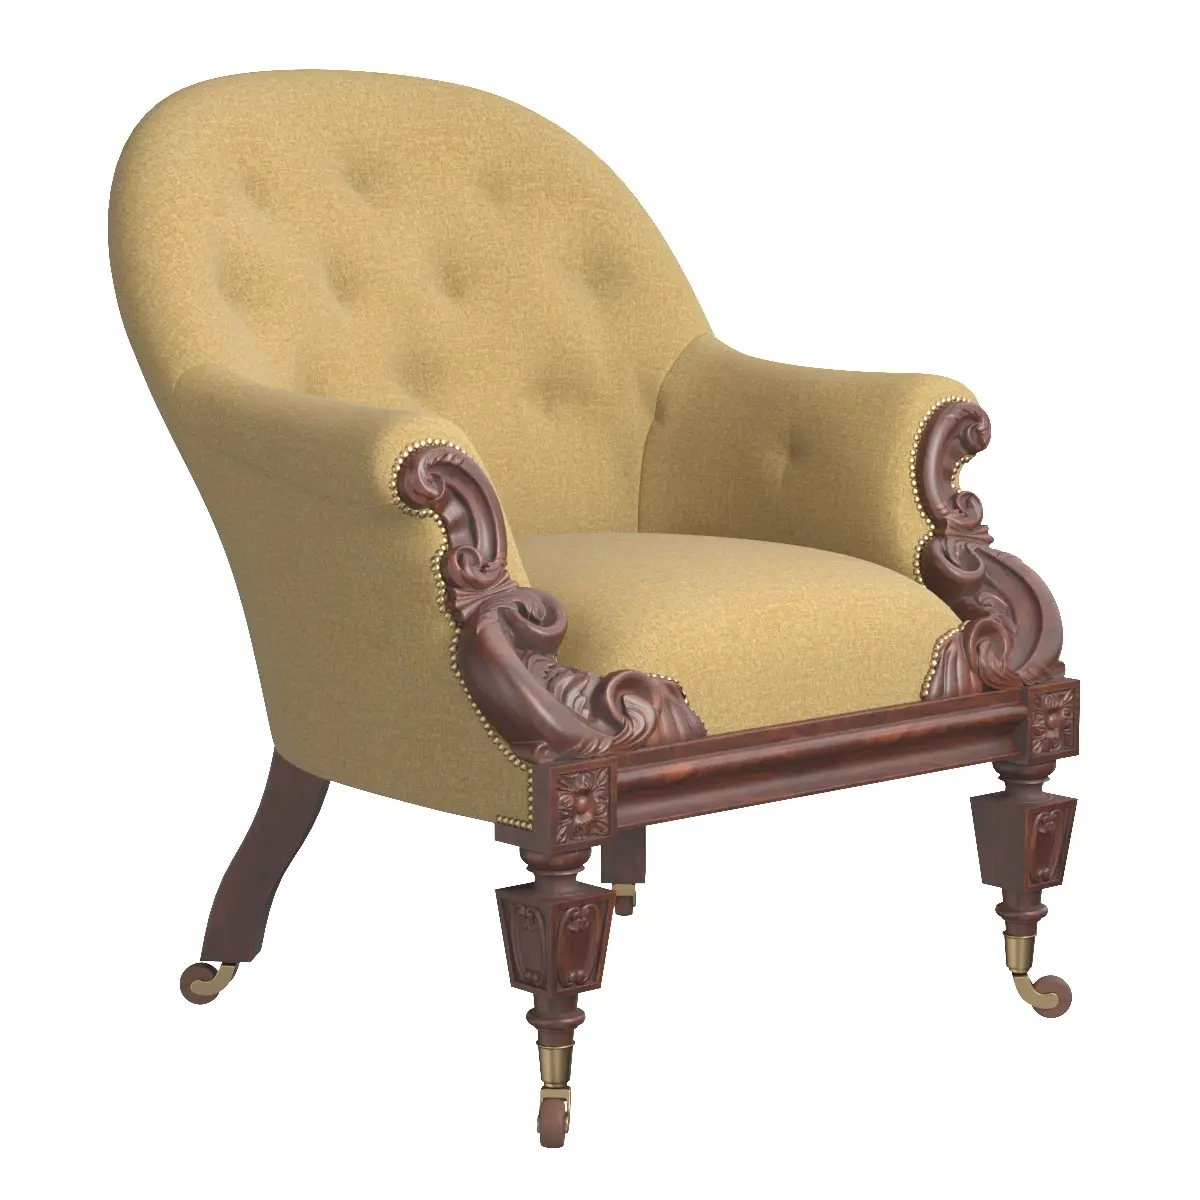 Early Victorian Rosewood Armchair 3D Model_01